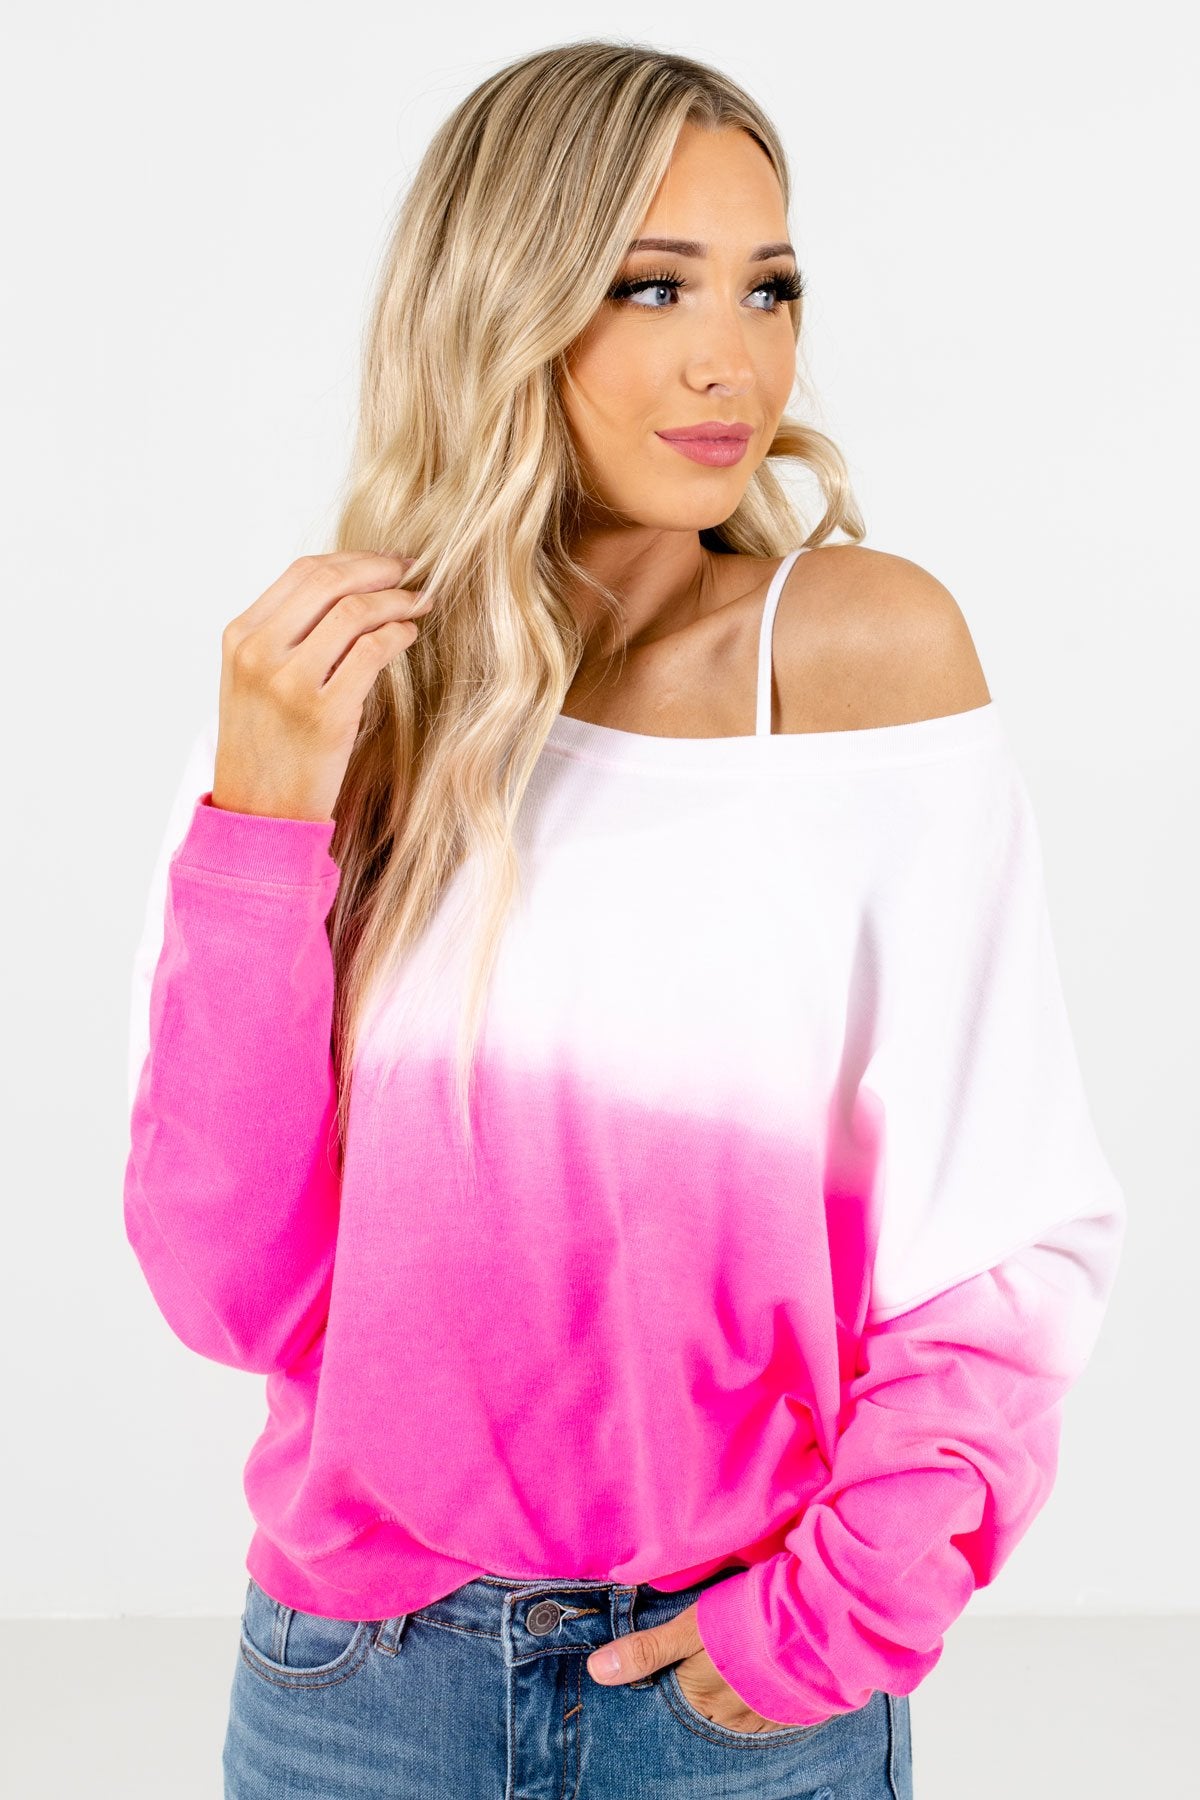 Pink and White Ombre Tie-Dye Patterned Boutique Pullovers for Women